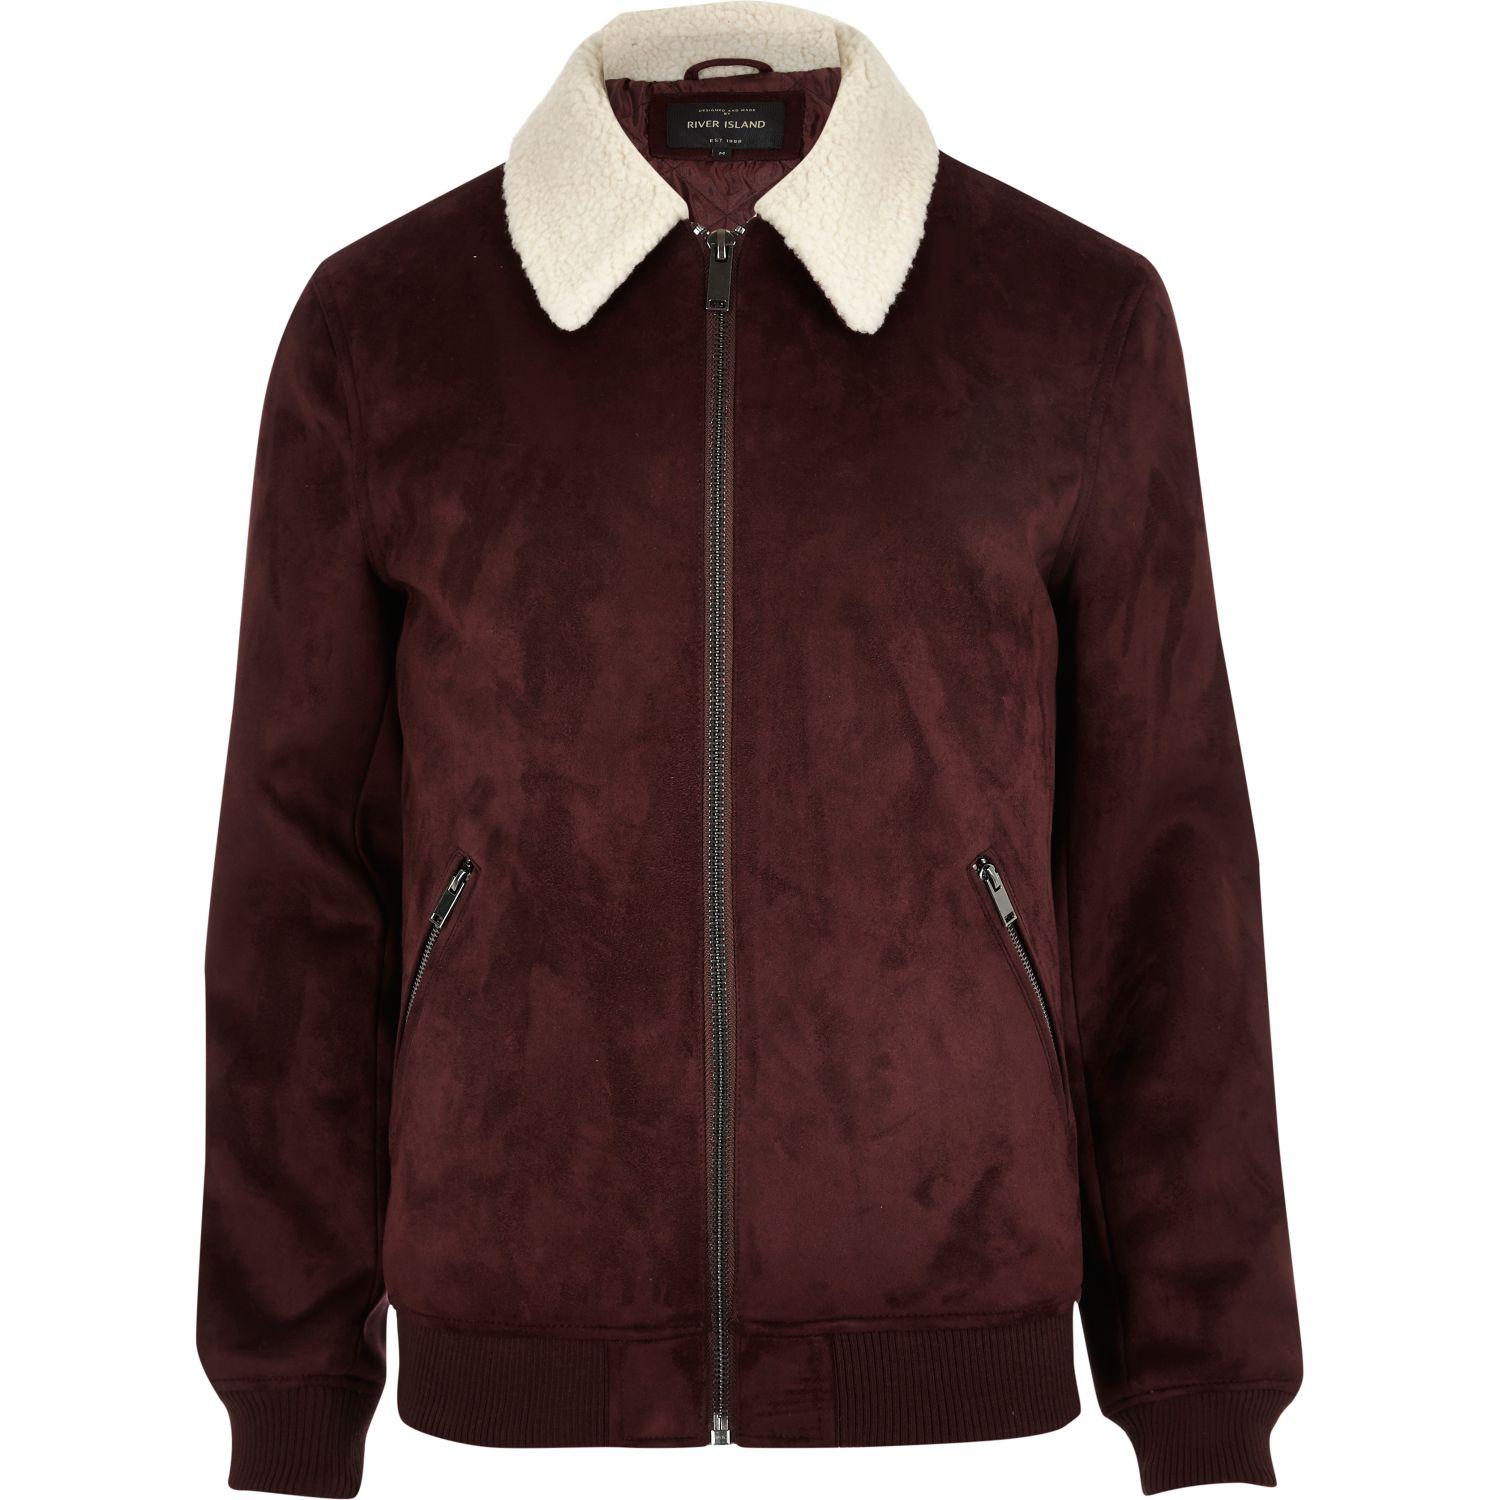 Lyst - River Island Faux-Suede Borg Collar Jacket in Red for Men